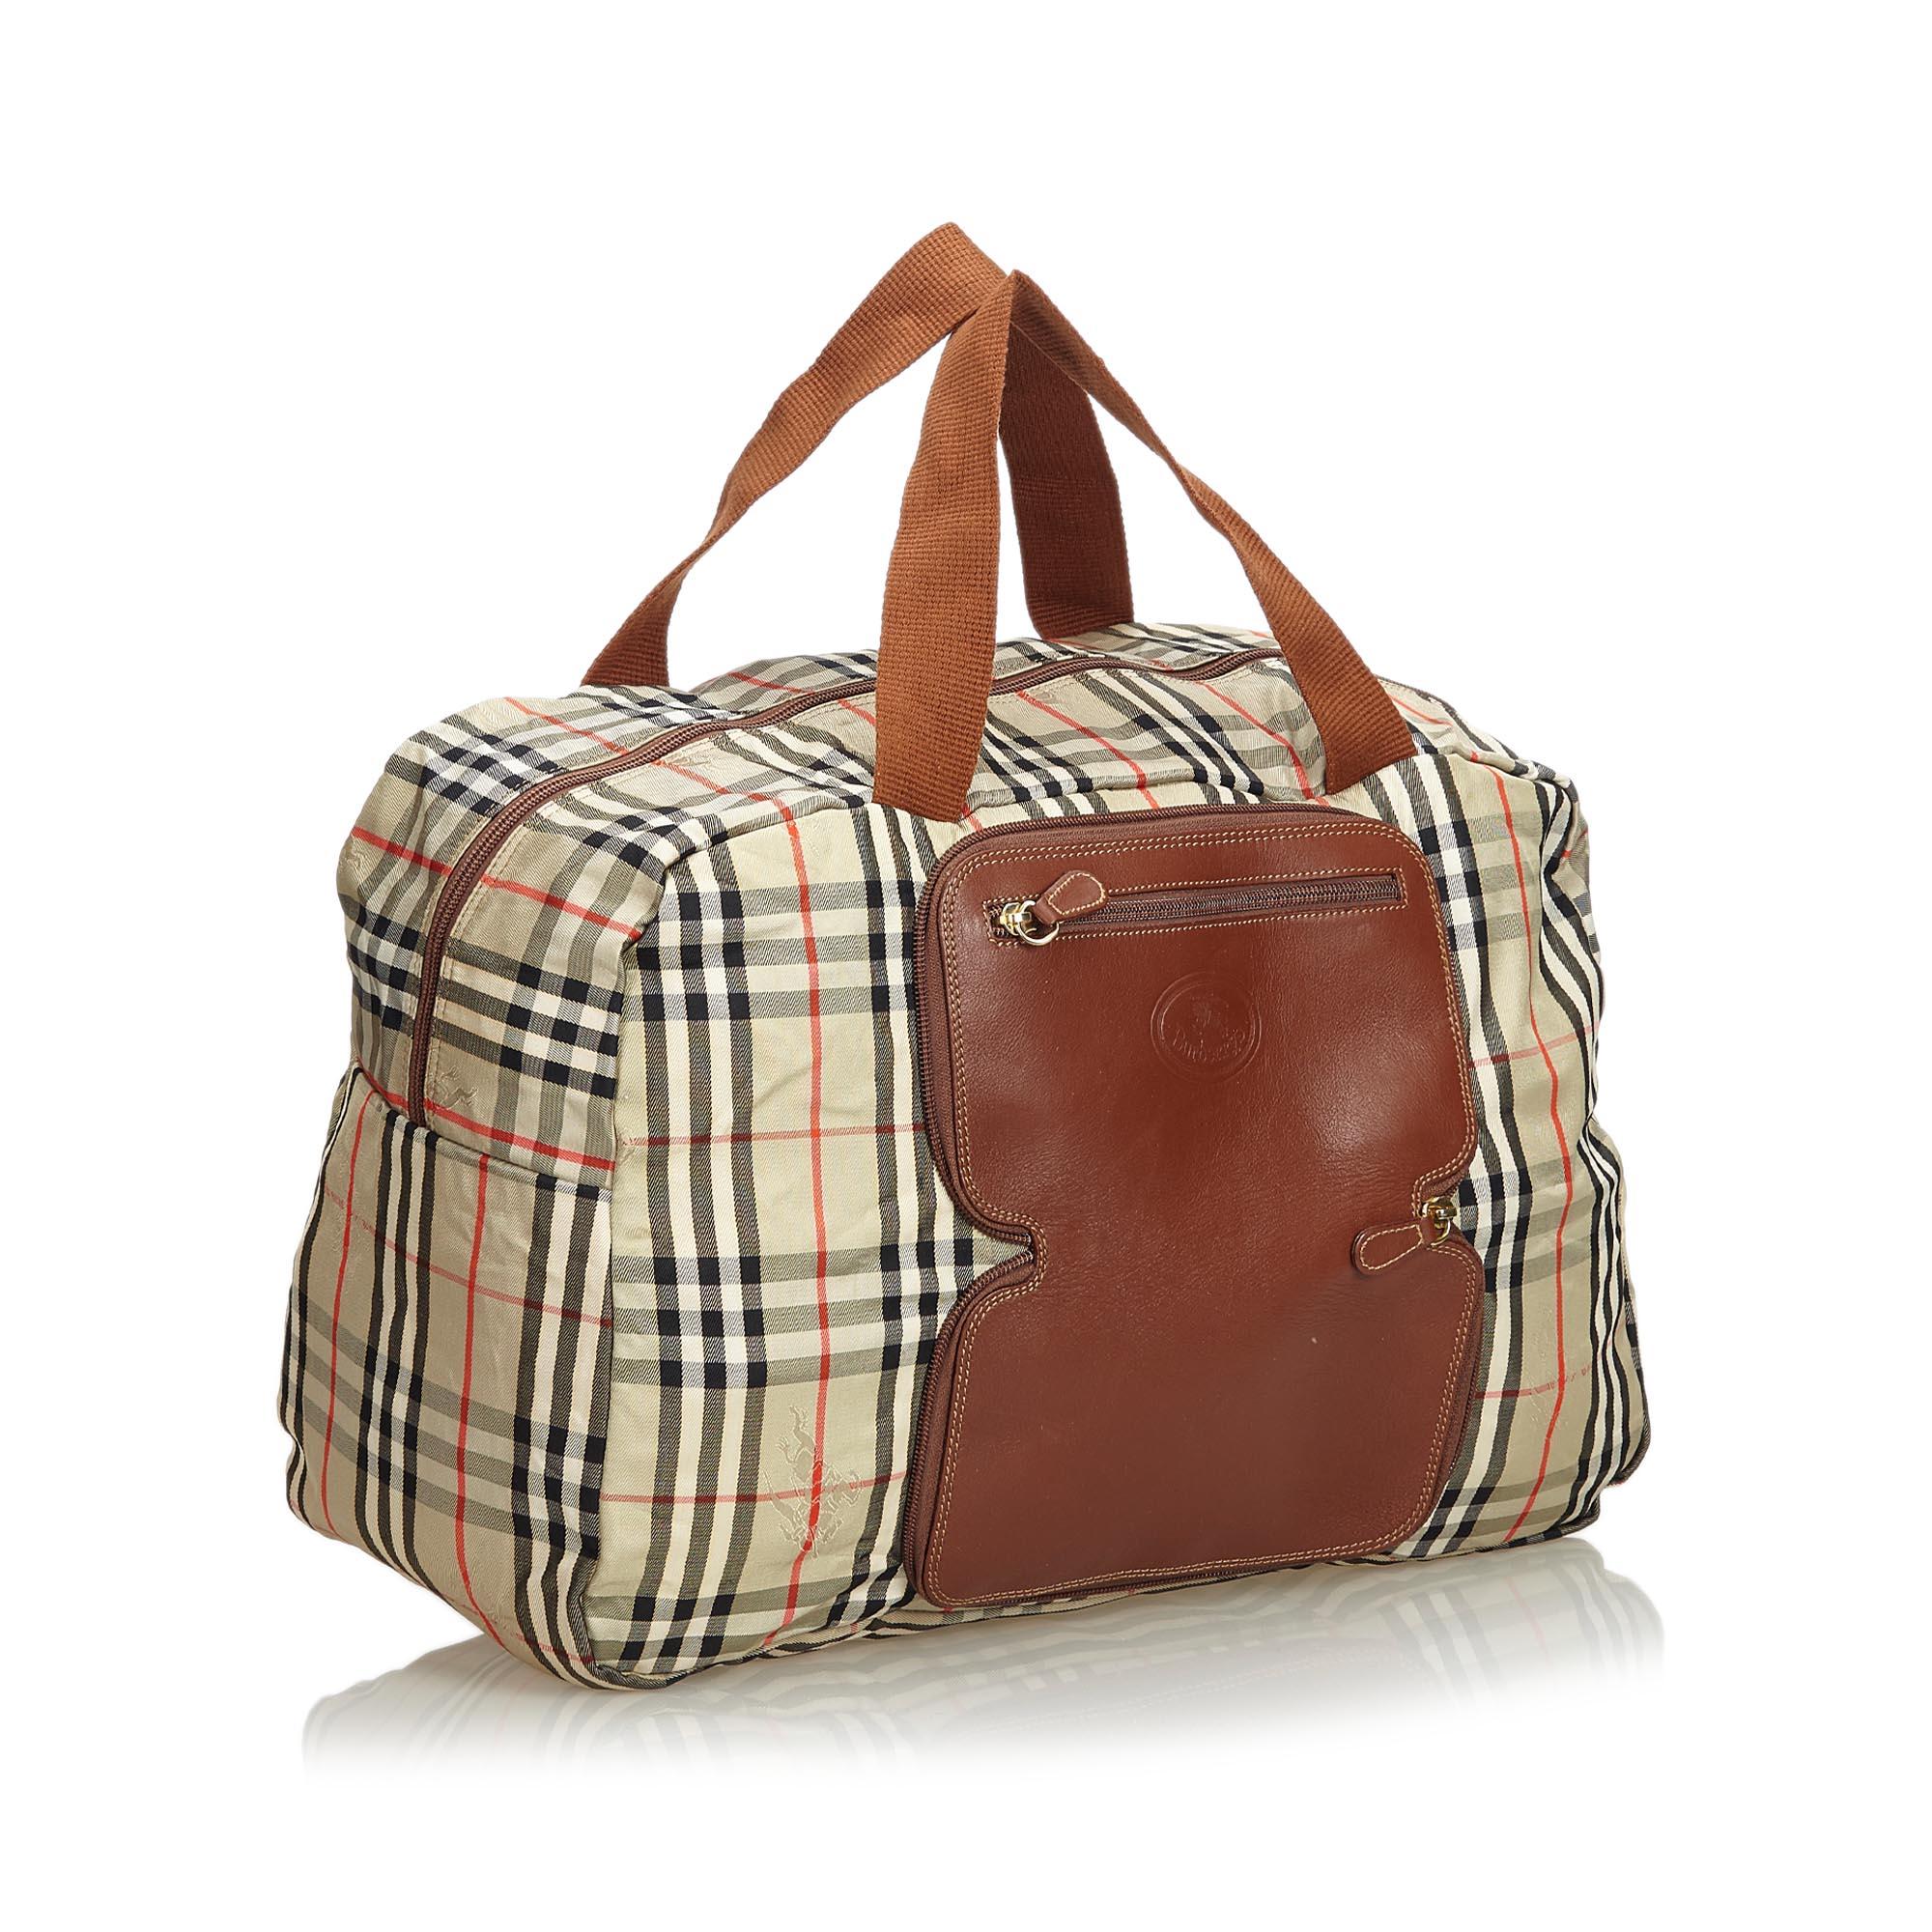 This duffle bag features a nylon body with leather trim, front exterior zip pockets, flat top handles, and a top zip closure. It carries as B+ condition rating.

Inclusions: 
This item does not come with inclusions.

Dimensions:
Length: 29.00